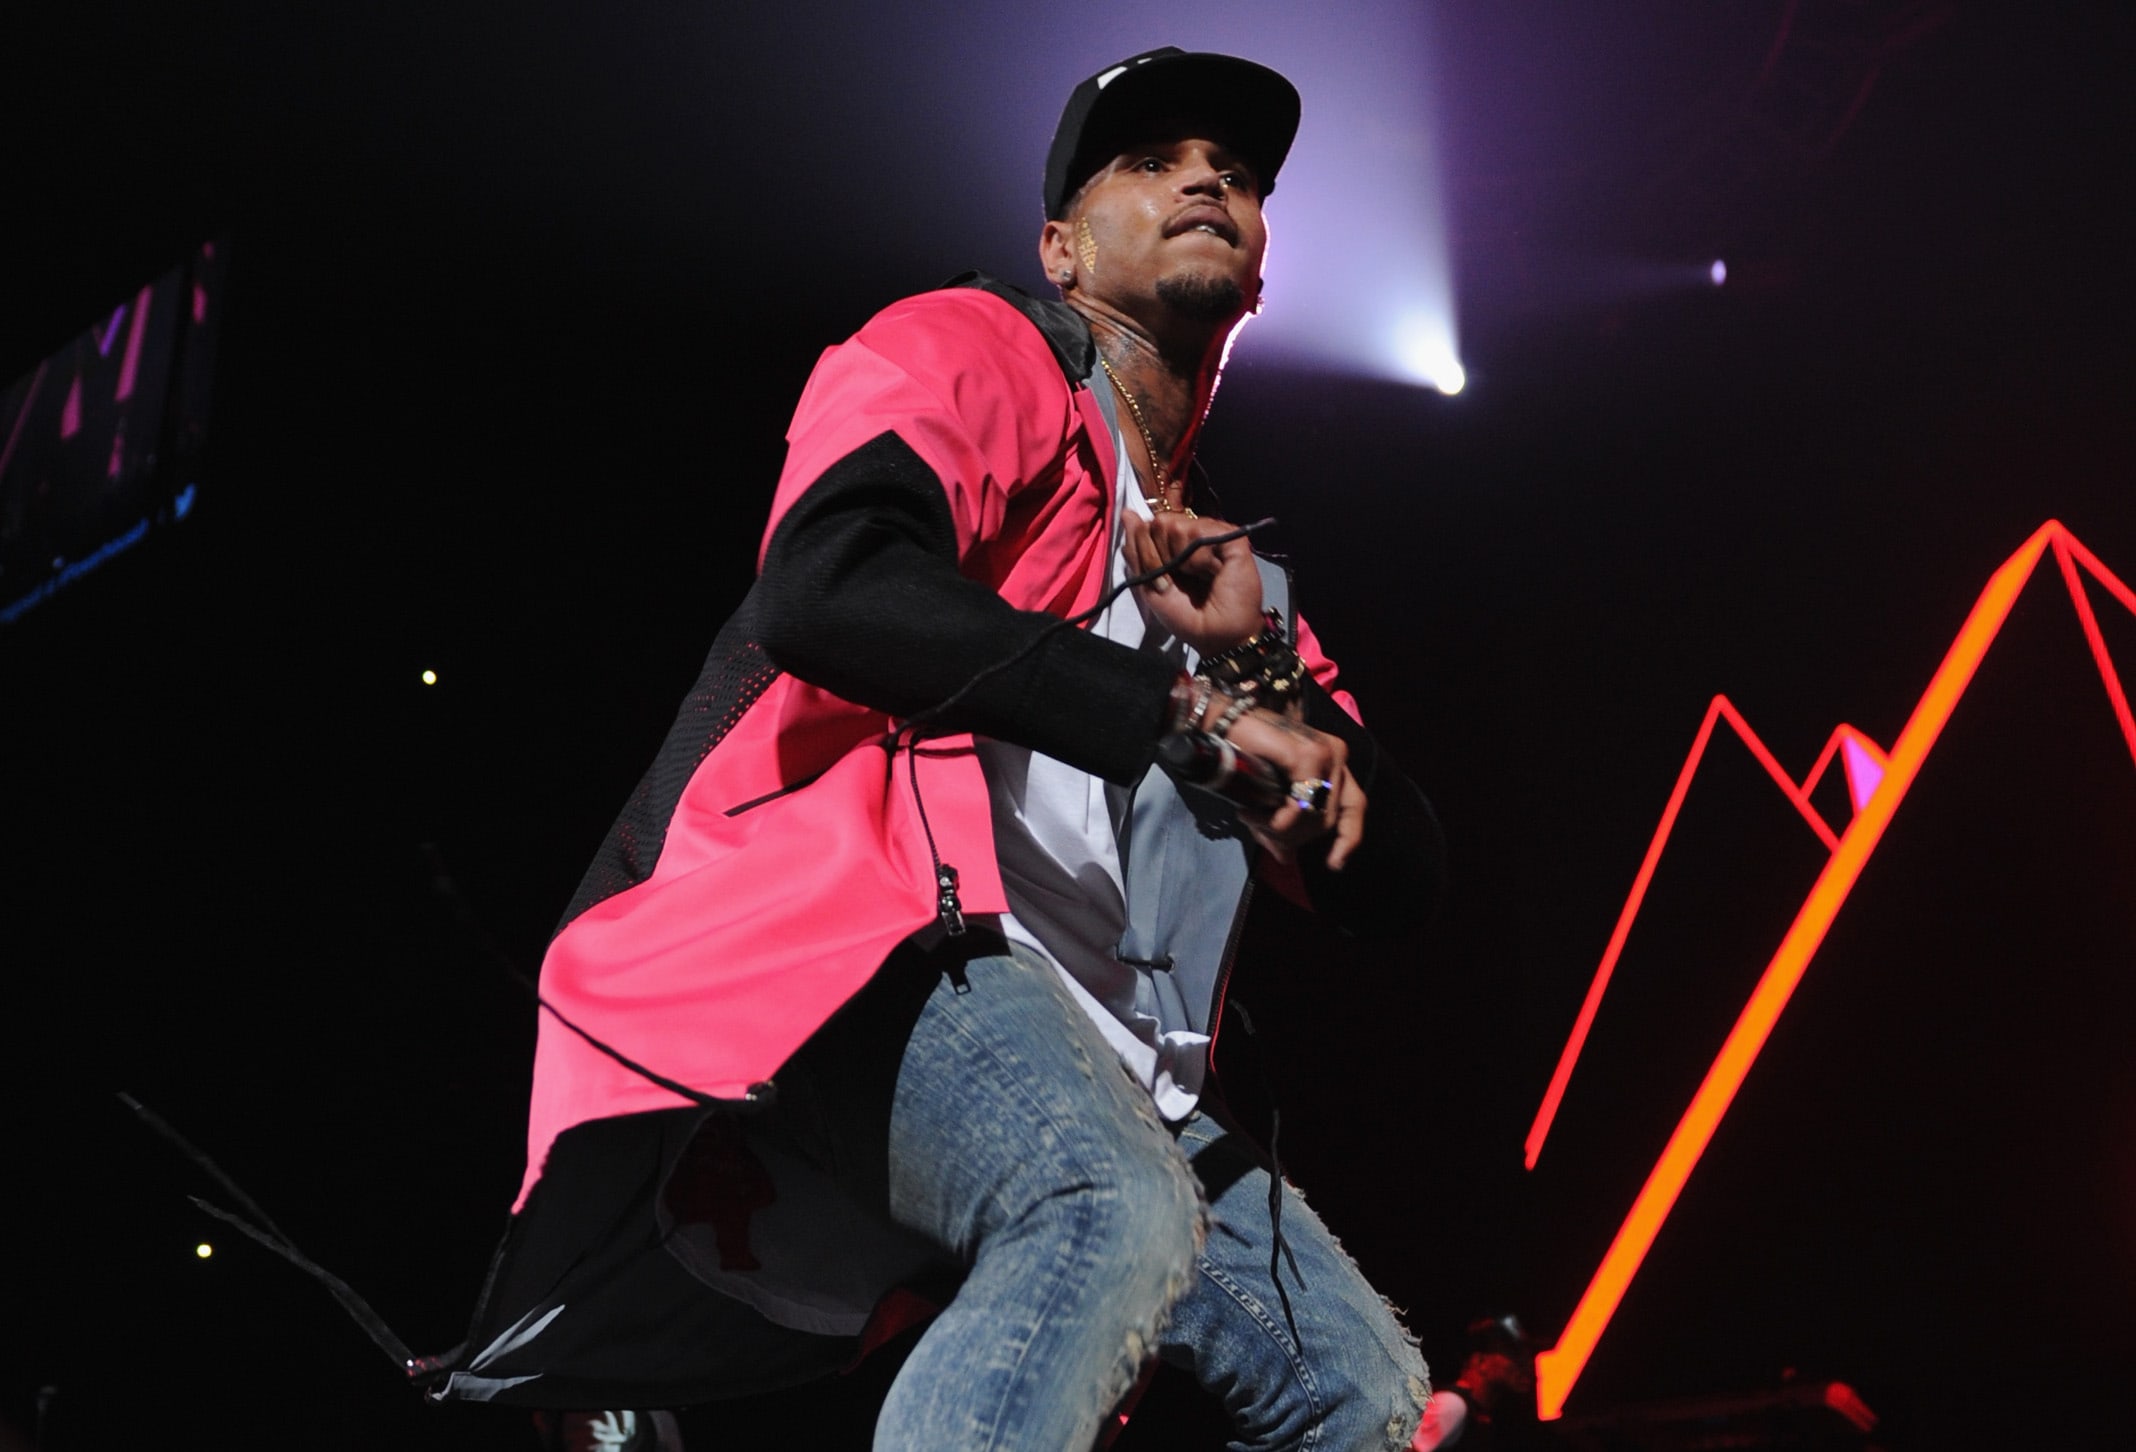 Chris Brown on stage in New York City in October 2014.